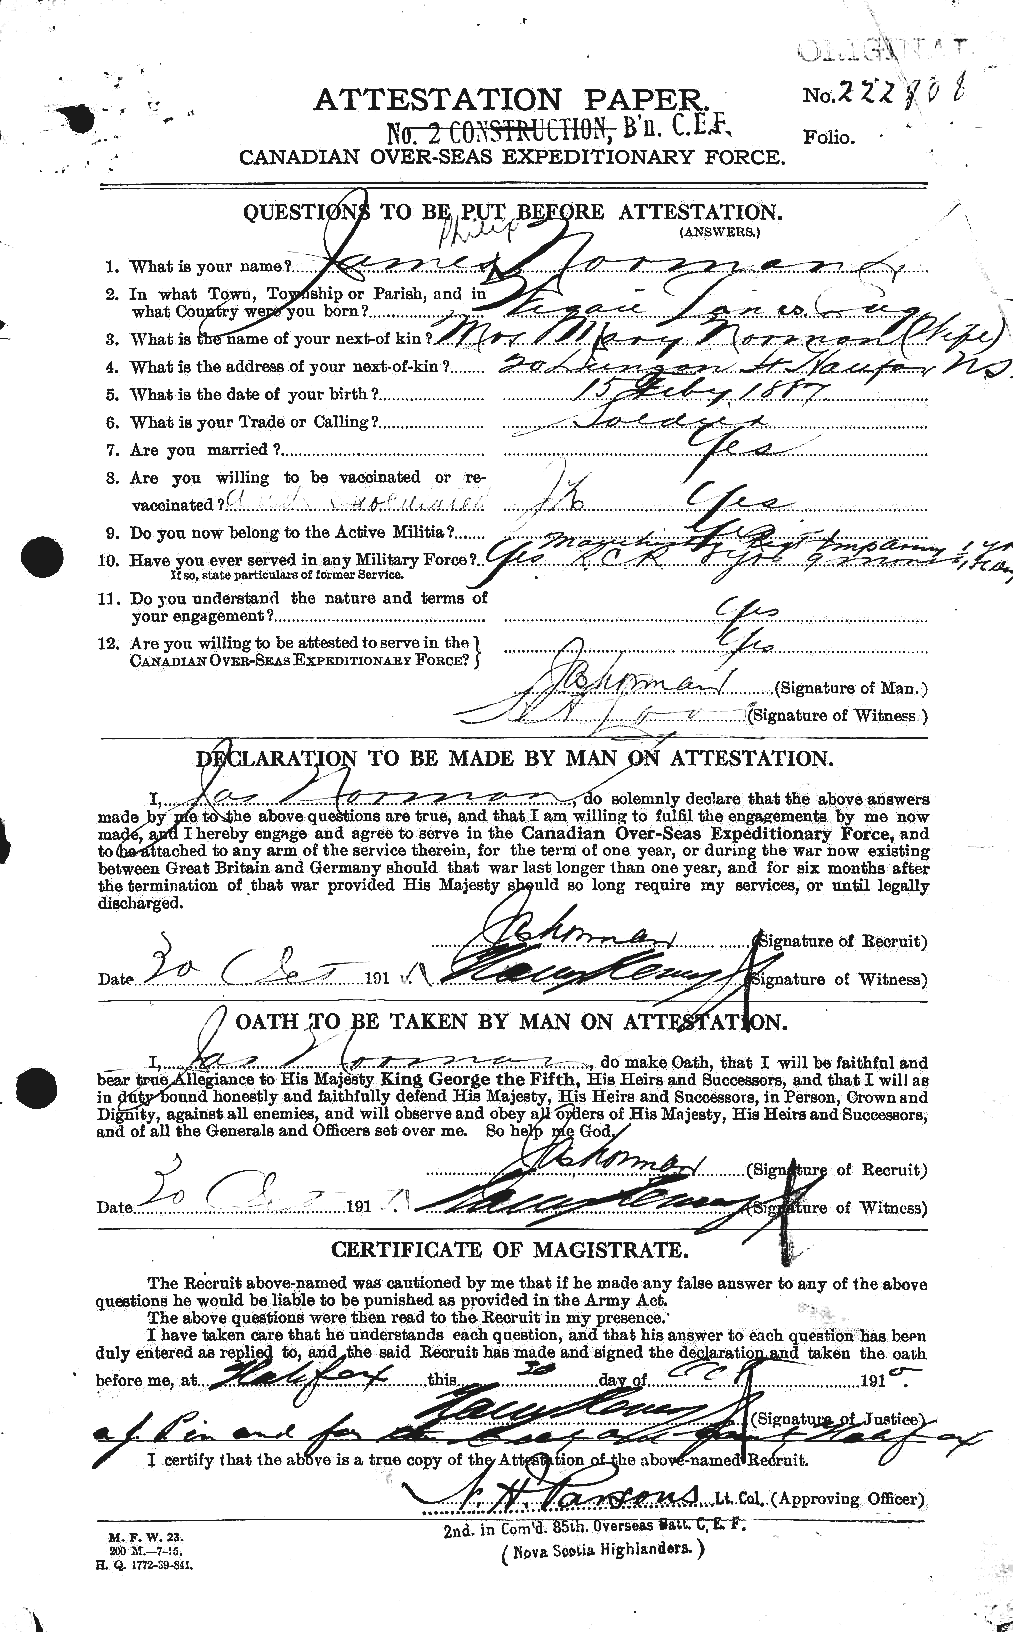 Personnel Records of the First World War - CEF 552134a